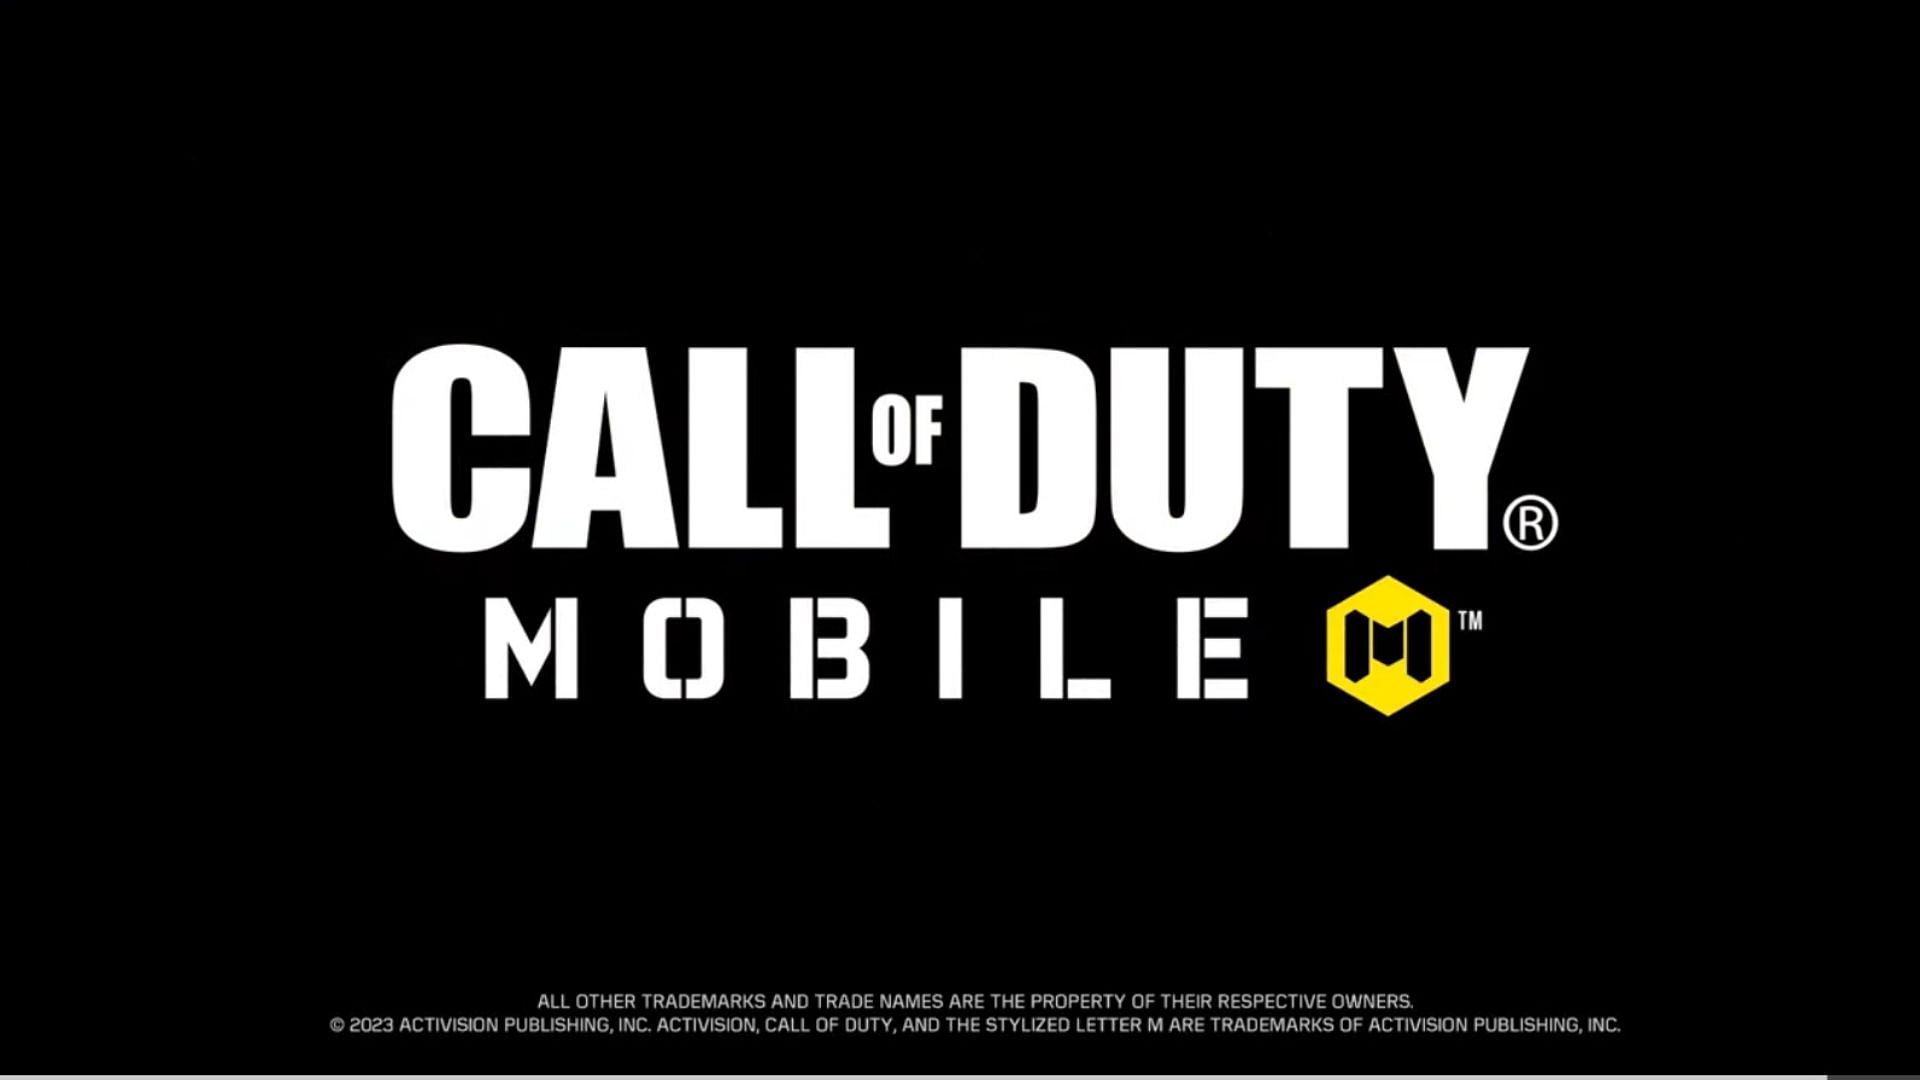 Activision affirmed to continue its support for COD Mobile (Image via Activision)